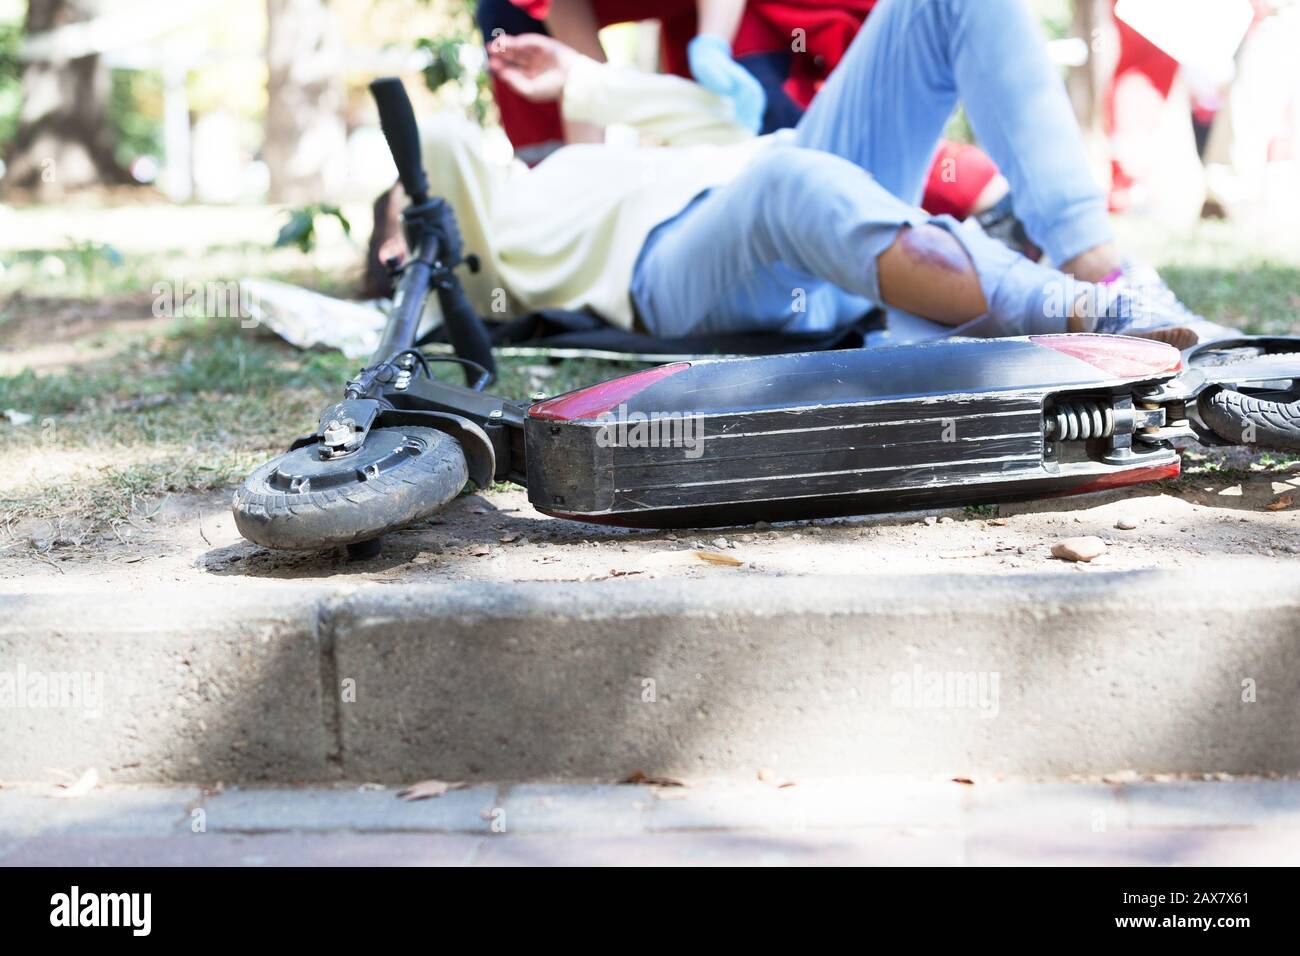 First aid after electric scooter accident Stock Photo